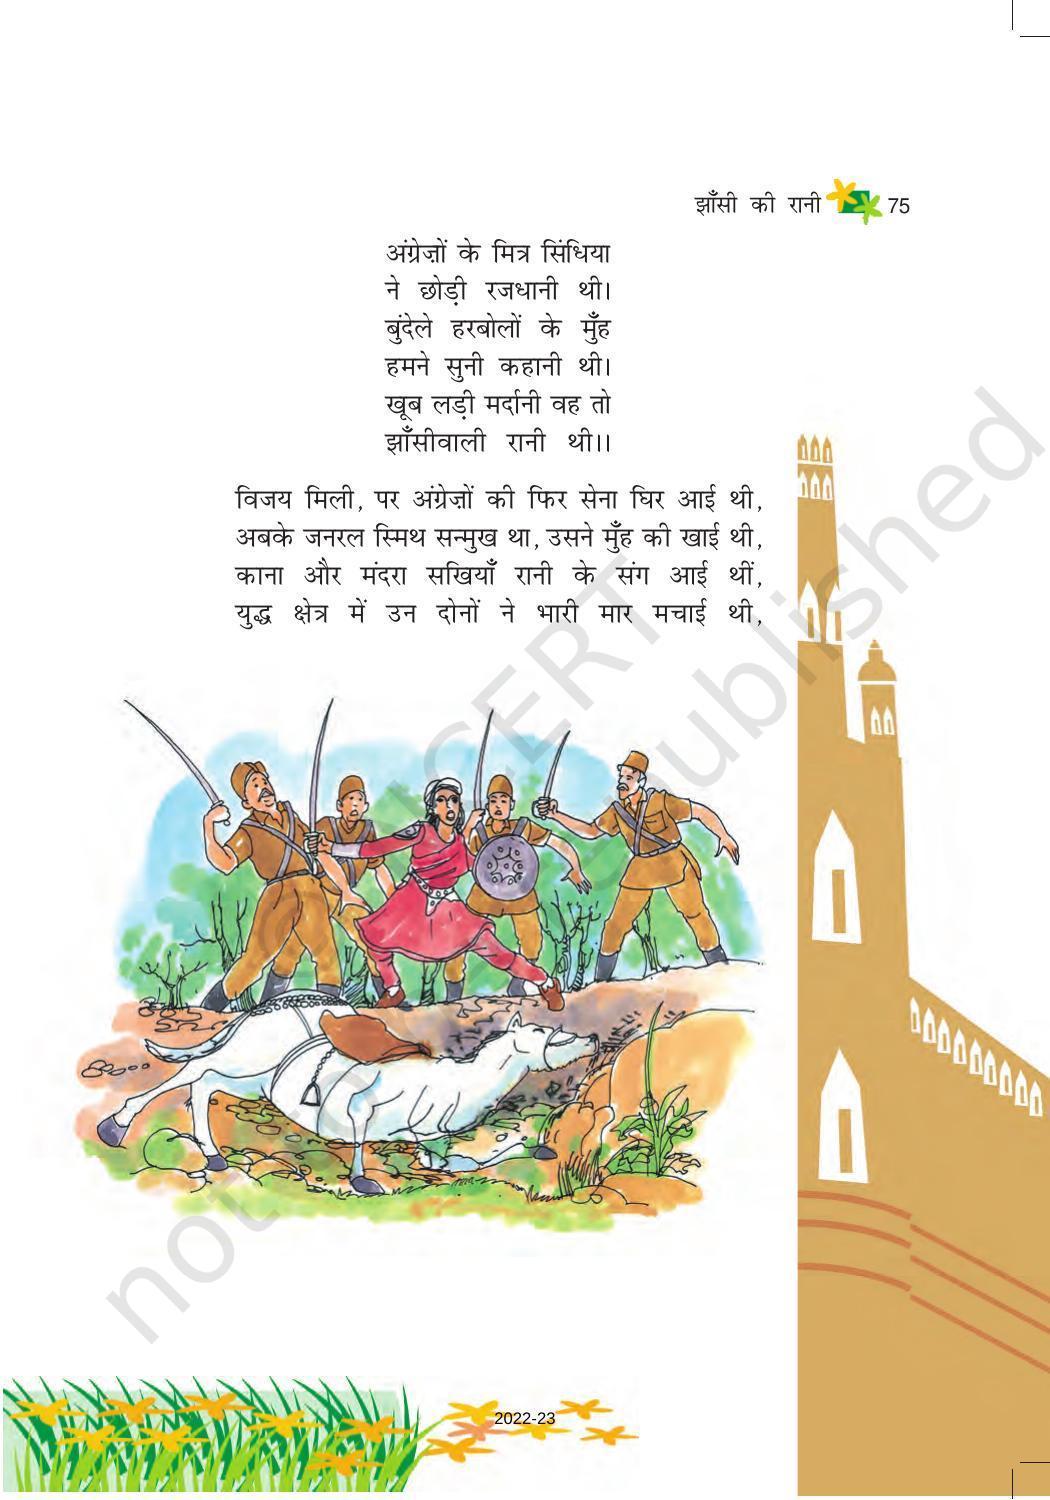 NCERT Book for Class 6 Hindi(Vasant Bhag 1) : Chapter 10-झांसी की रानी - Page 7